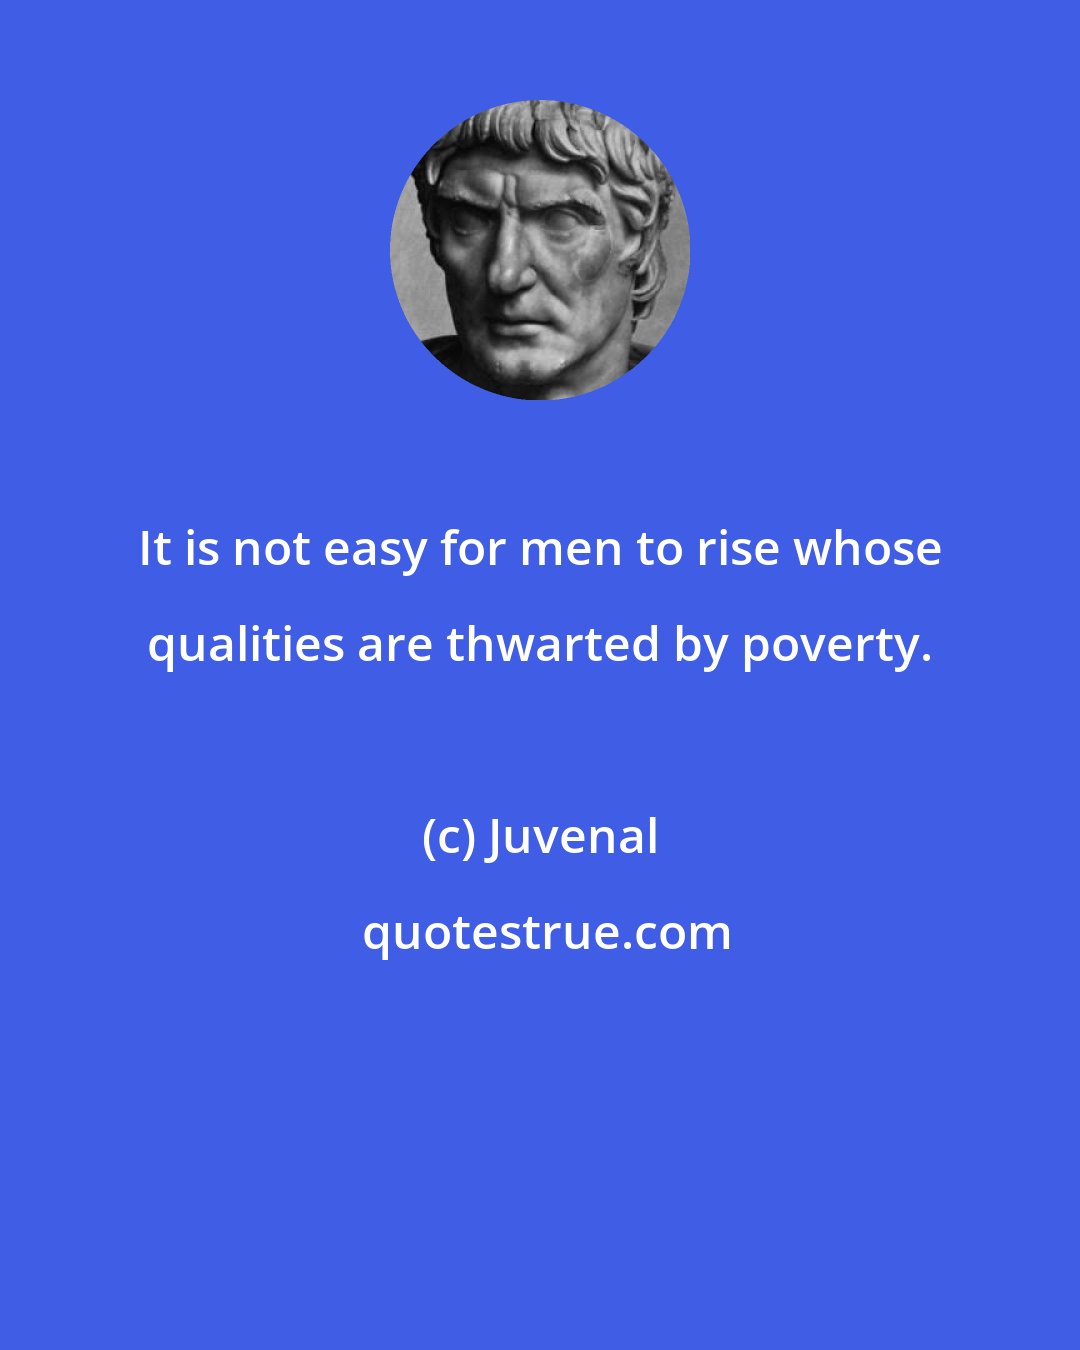 Juvenal: It is not easy for men to rise whose qualities are thwarted by poverty.